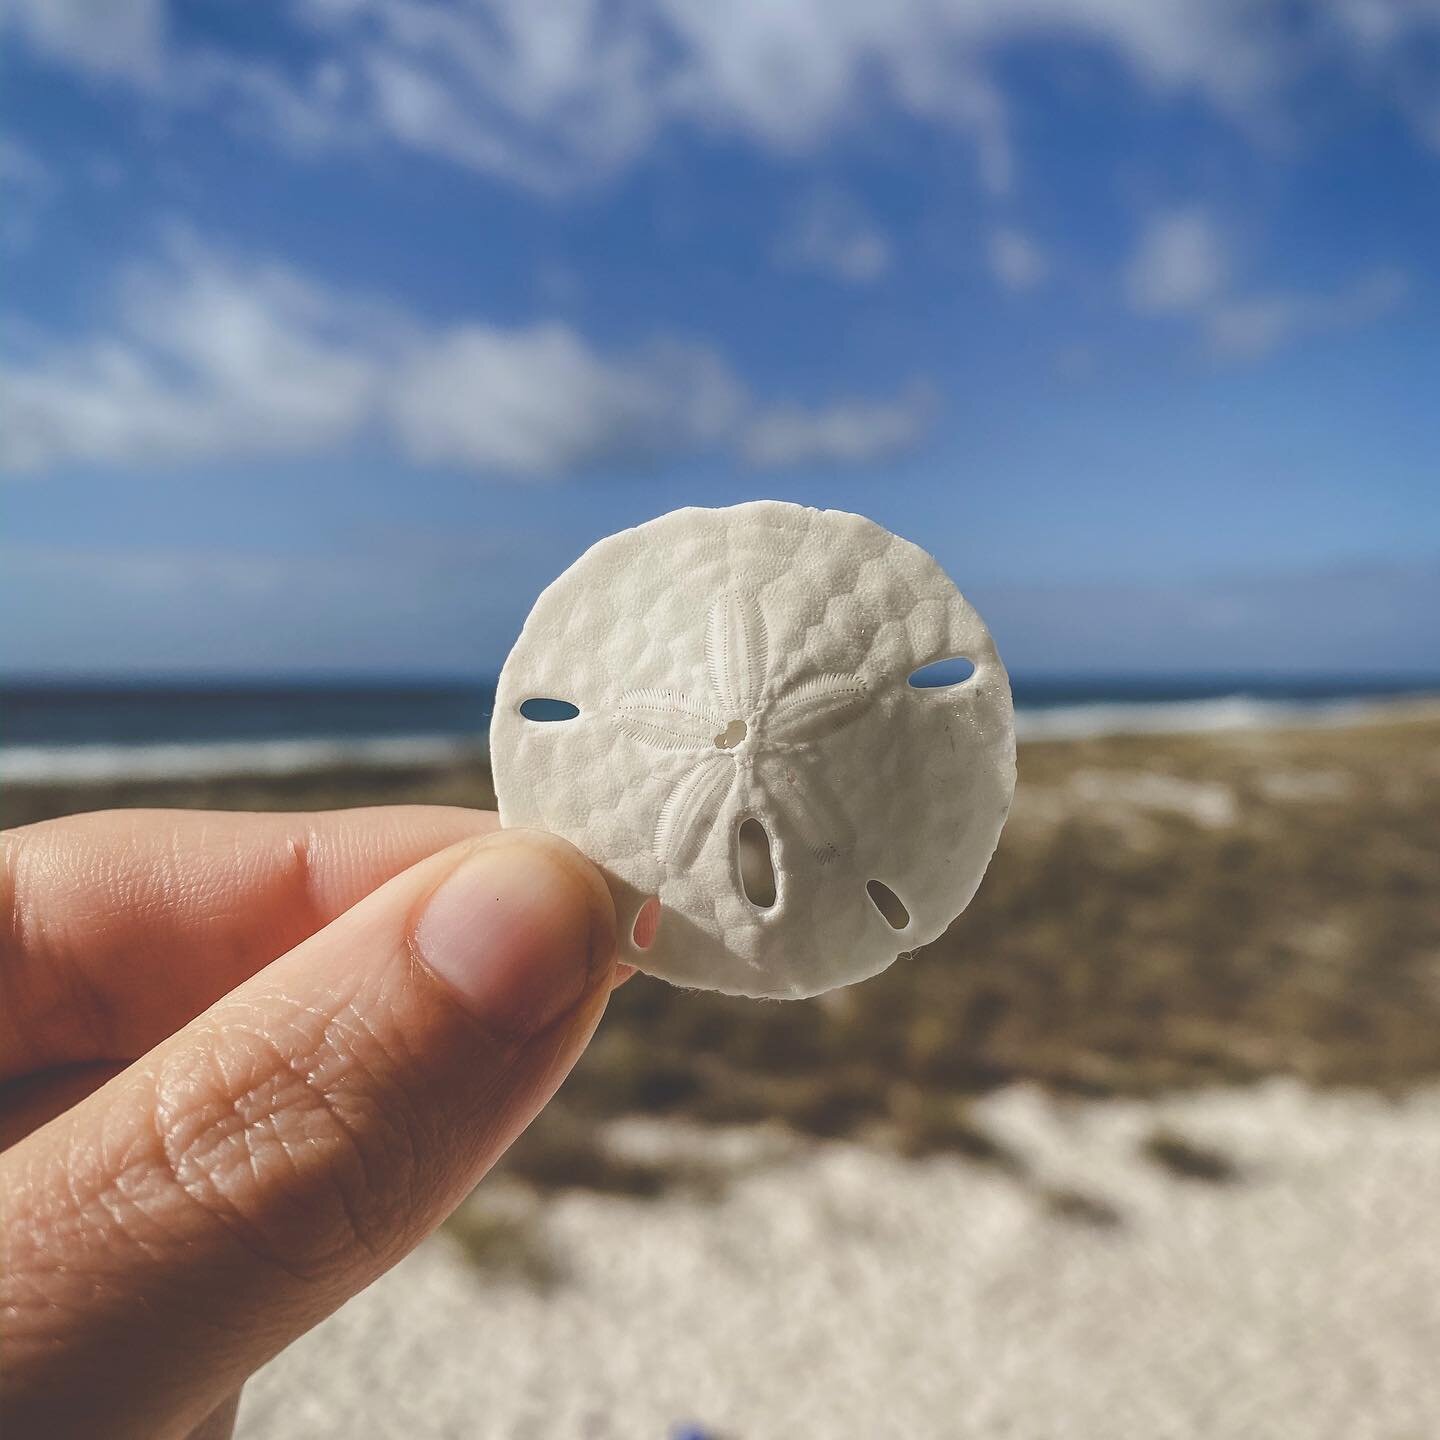 The sand dollar.  Perfectly created amidst the gulf waters. Waters that are a part of oceans that are largely unexplored. Somehow, as if by magic, this tiny little creature is formed and survives amidst endless amounts of beautiful shells. Shells tha